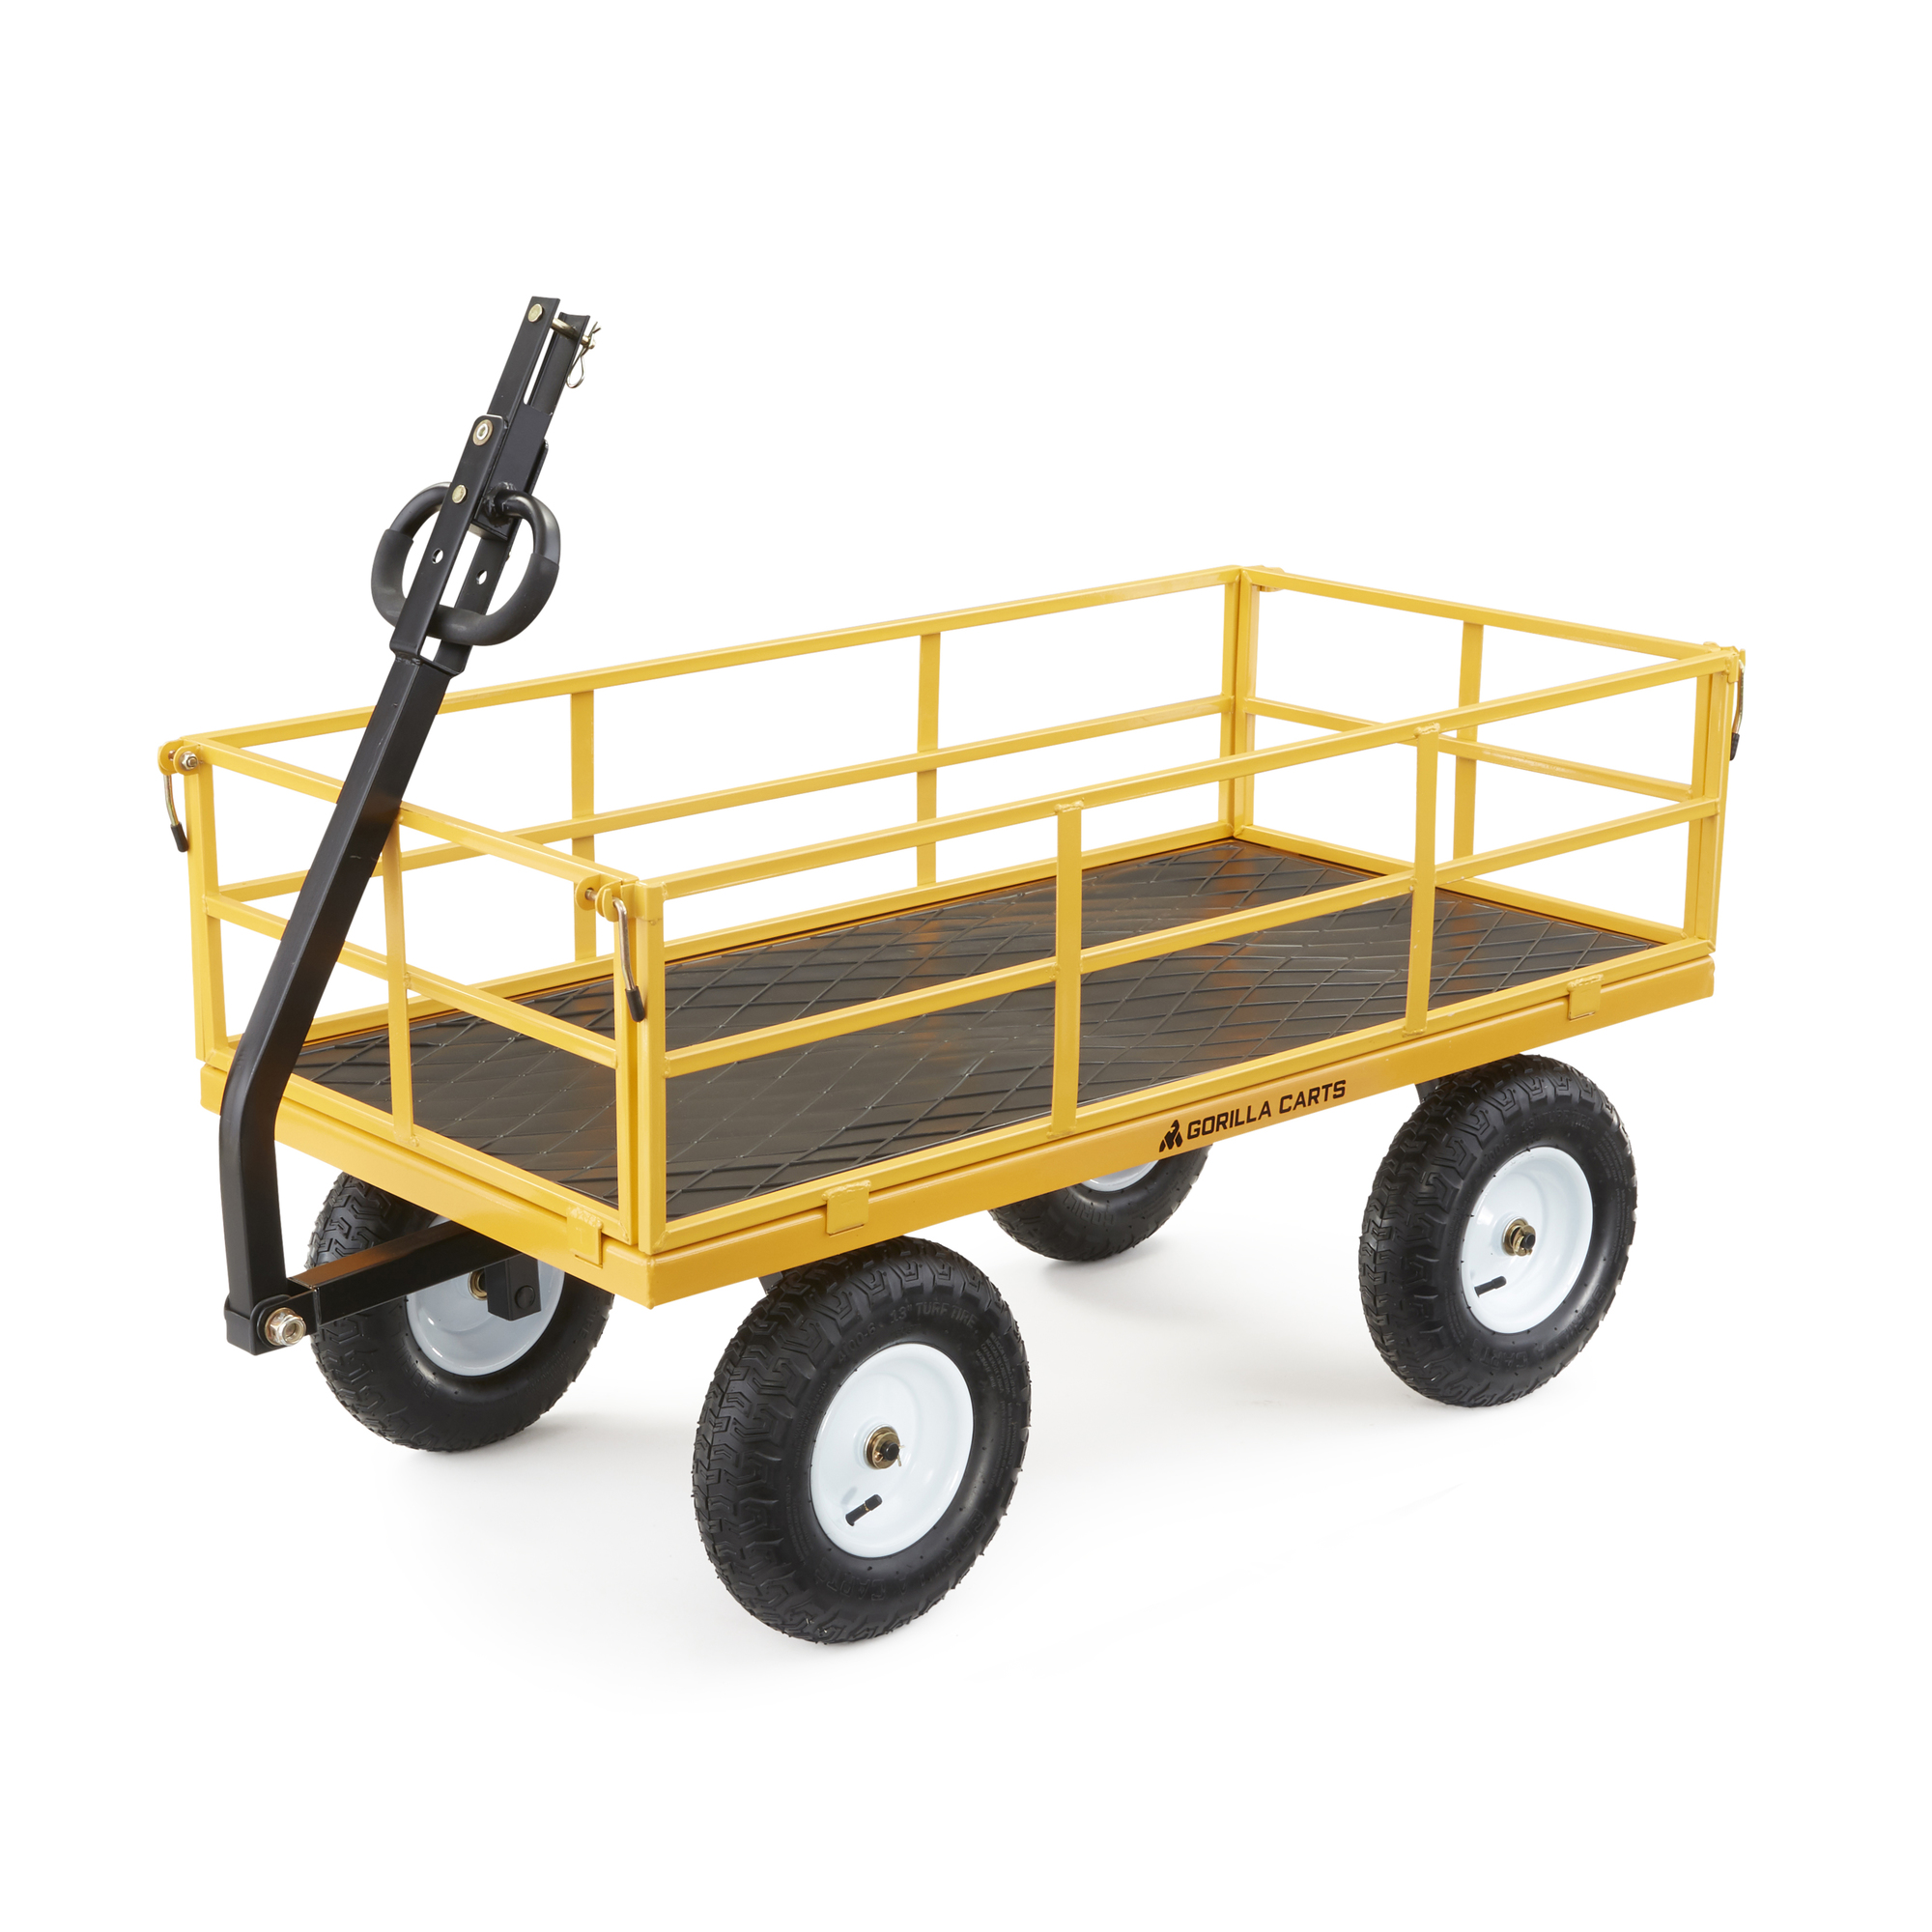 Comparing Gorilla Carts - Which Size Dump Cart Is Better?? 